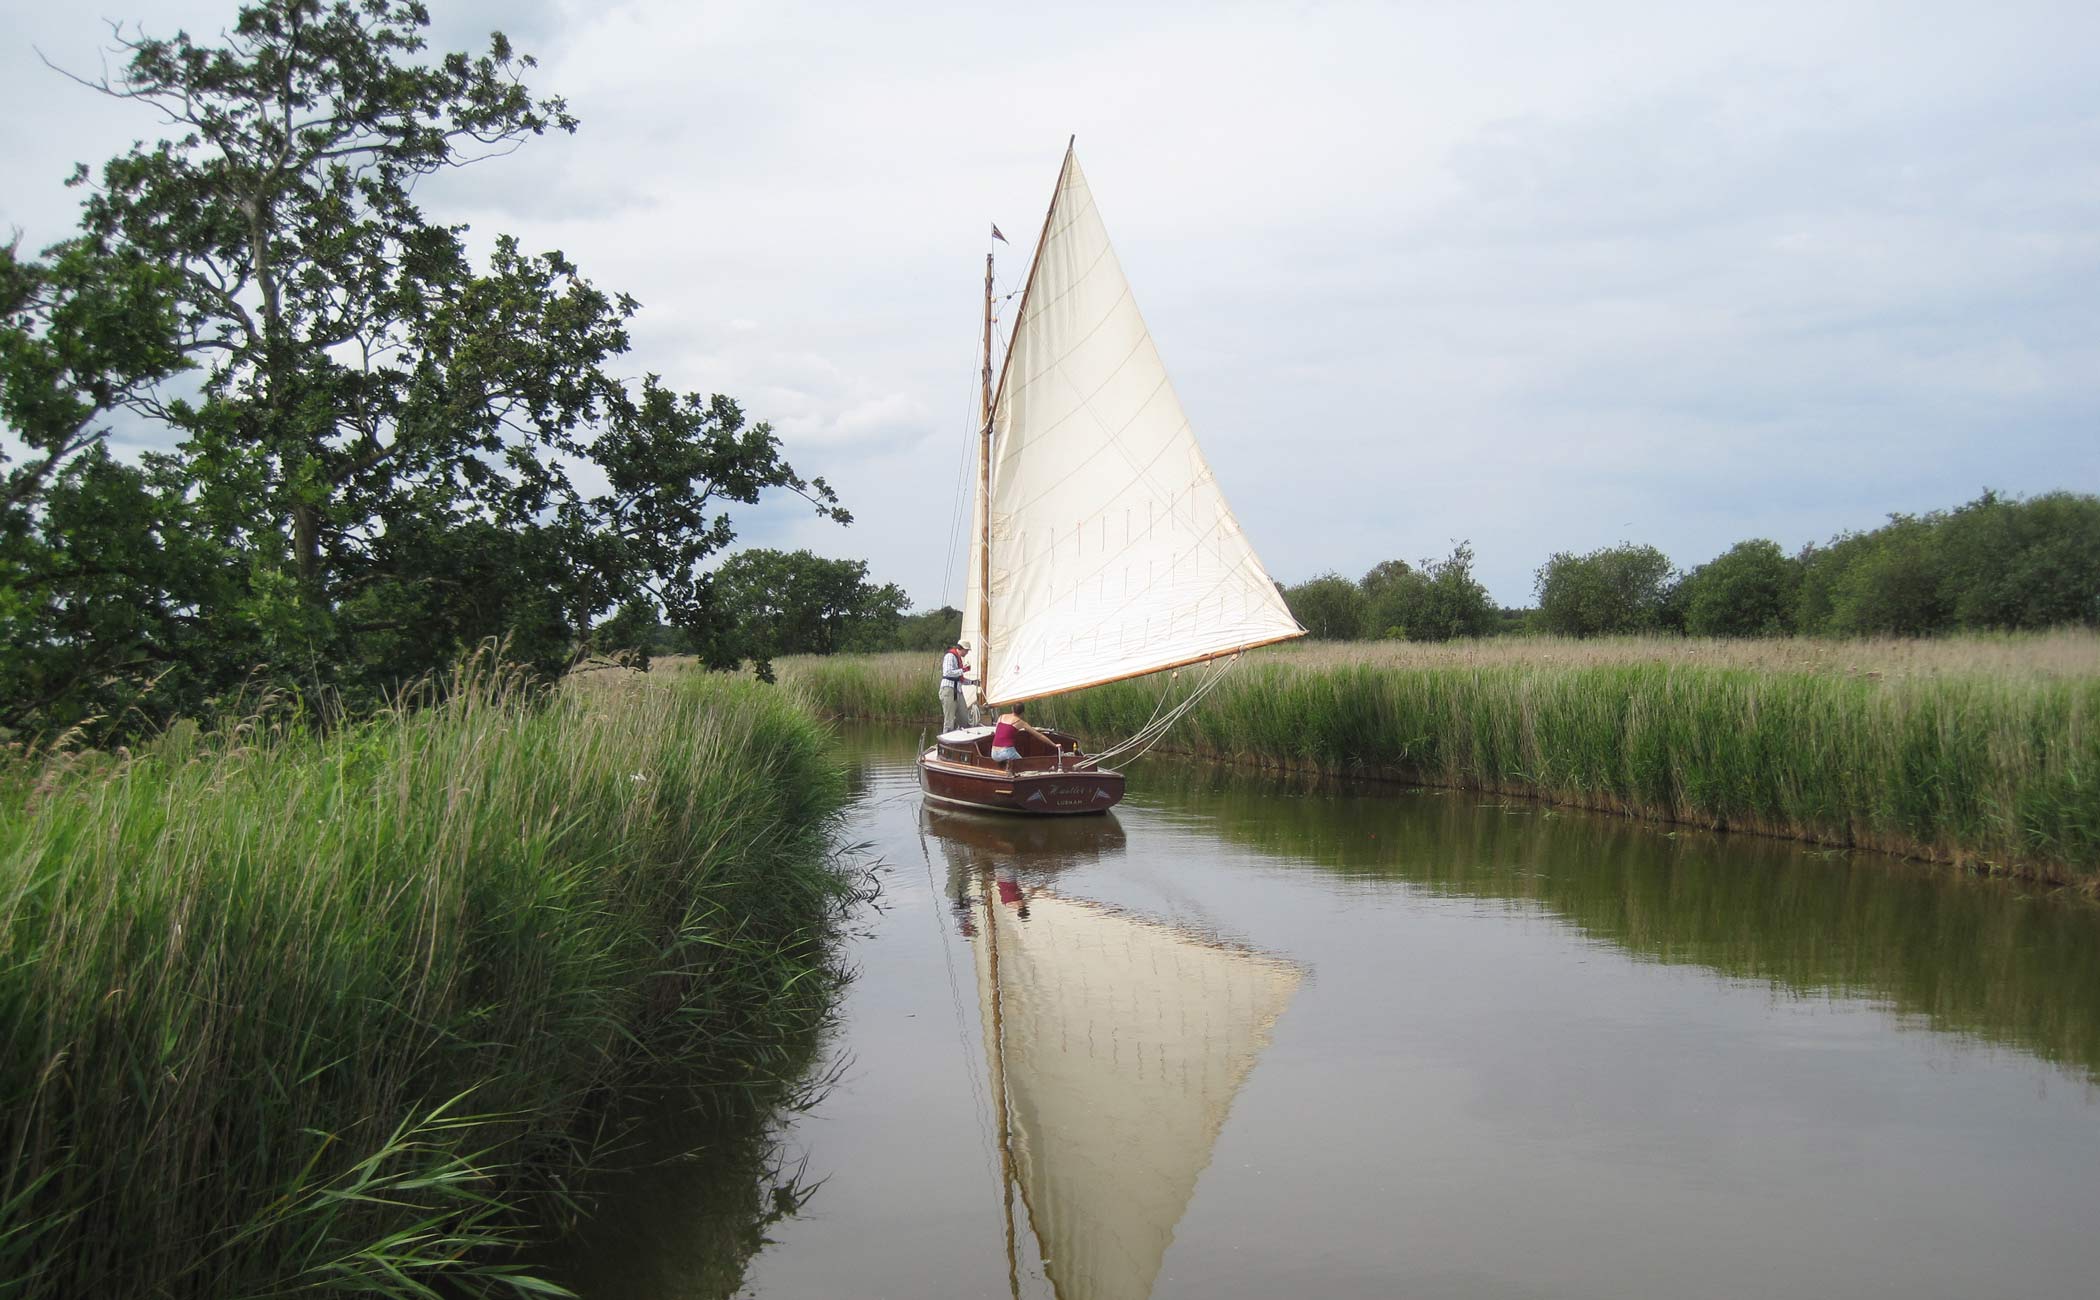 Hustler 5 meandering down a quiet river. A traditional wooden Norfolk Broads cabin yacht.